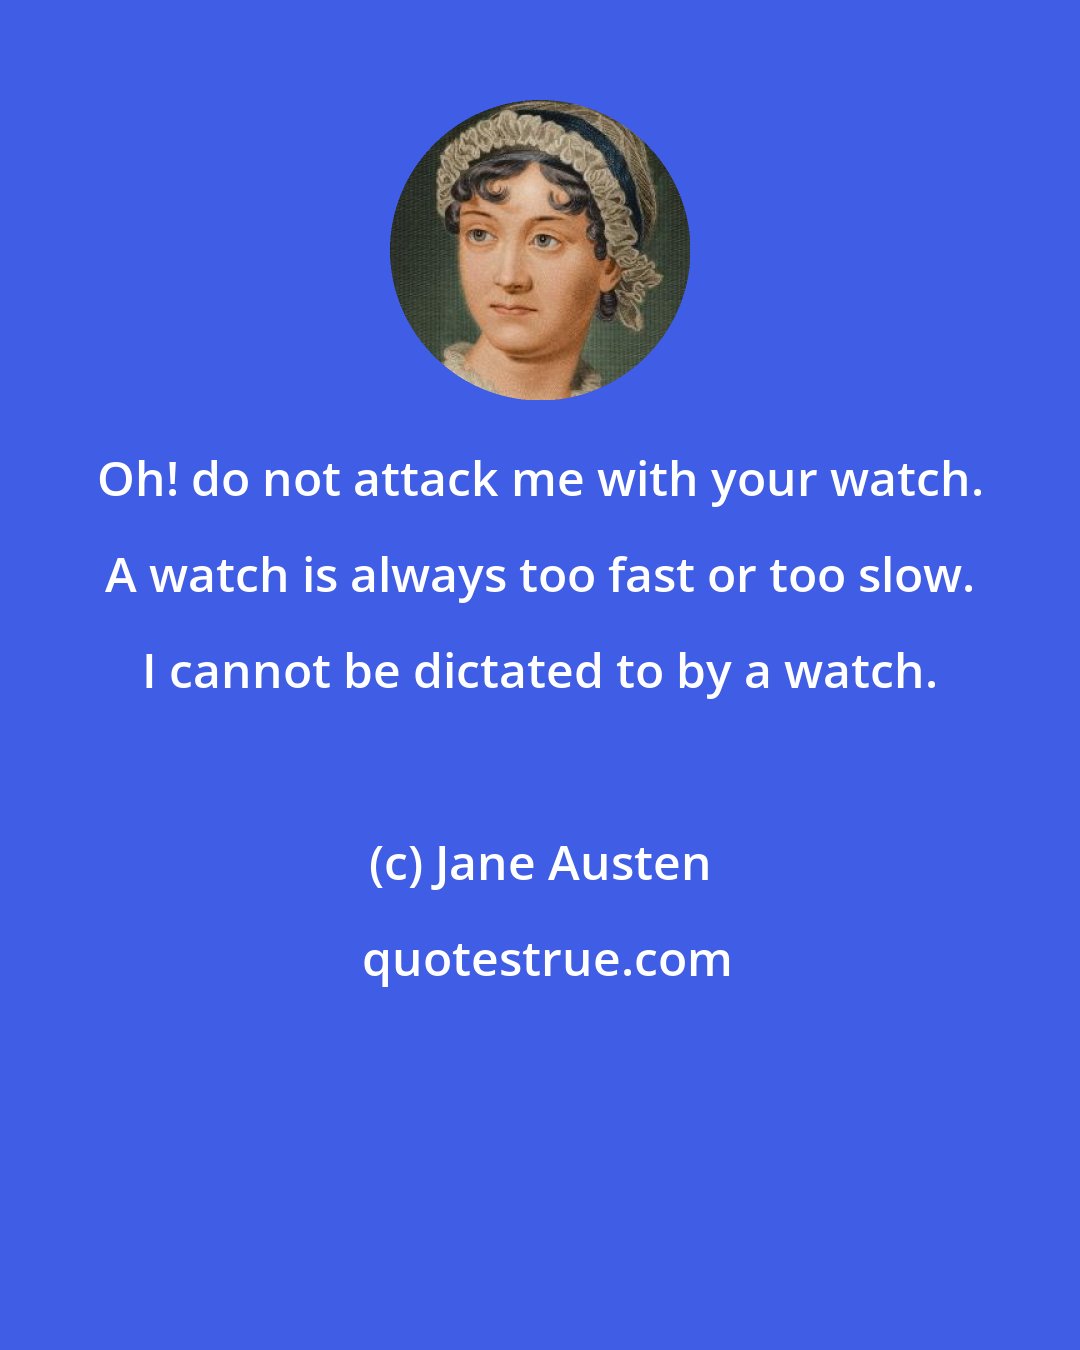 Jane Austen: Oh! do not attack me with your watch. A watch is always too fast or too slow. I cannot be dictated to by a watch.